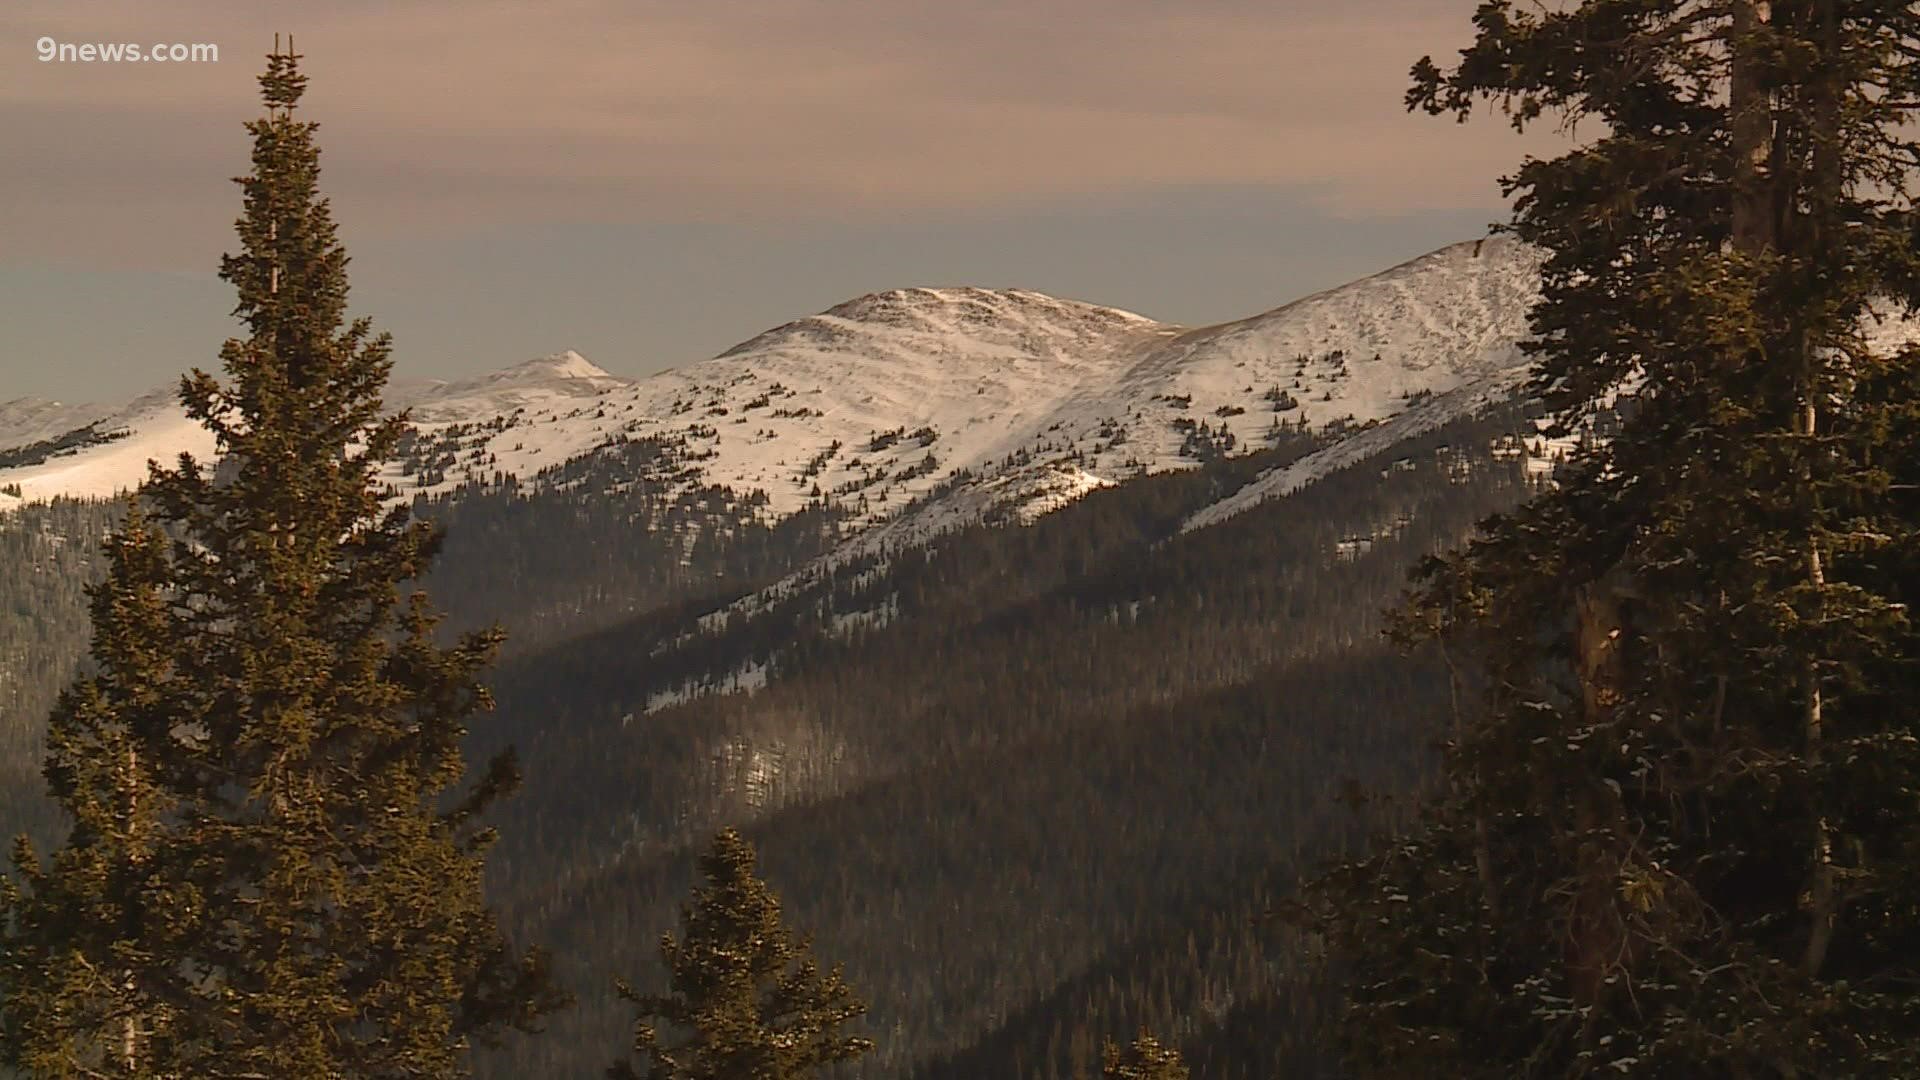 Heavy snow in the mountains helped give a big boost to the waning snowpack, which is good for Colorado's water supply.